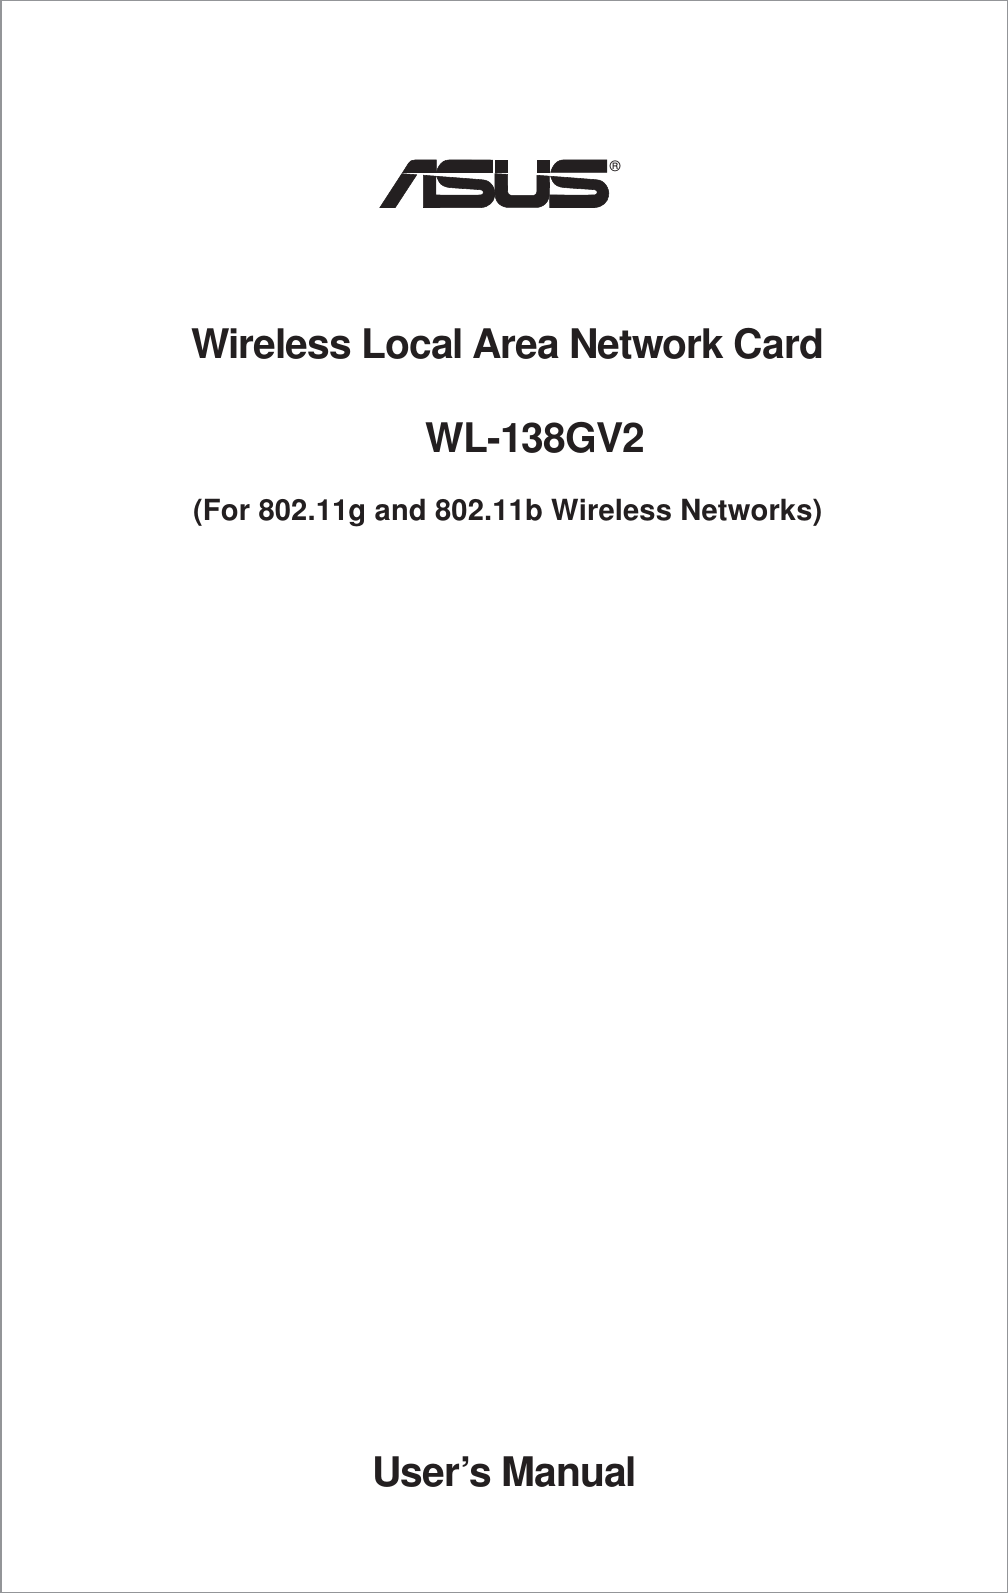 ®User’s ManualWireless Local Area Network CardWL-138GV2(For 802.11g and 802.11b Wireless Networks)